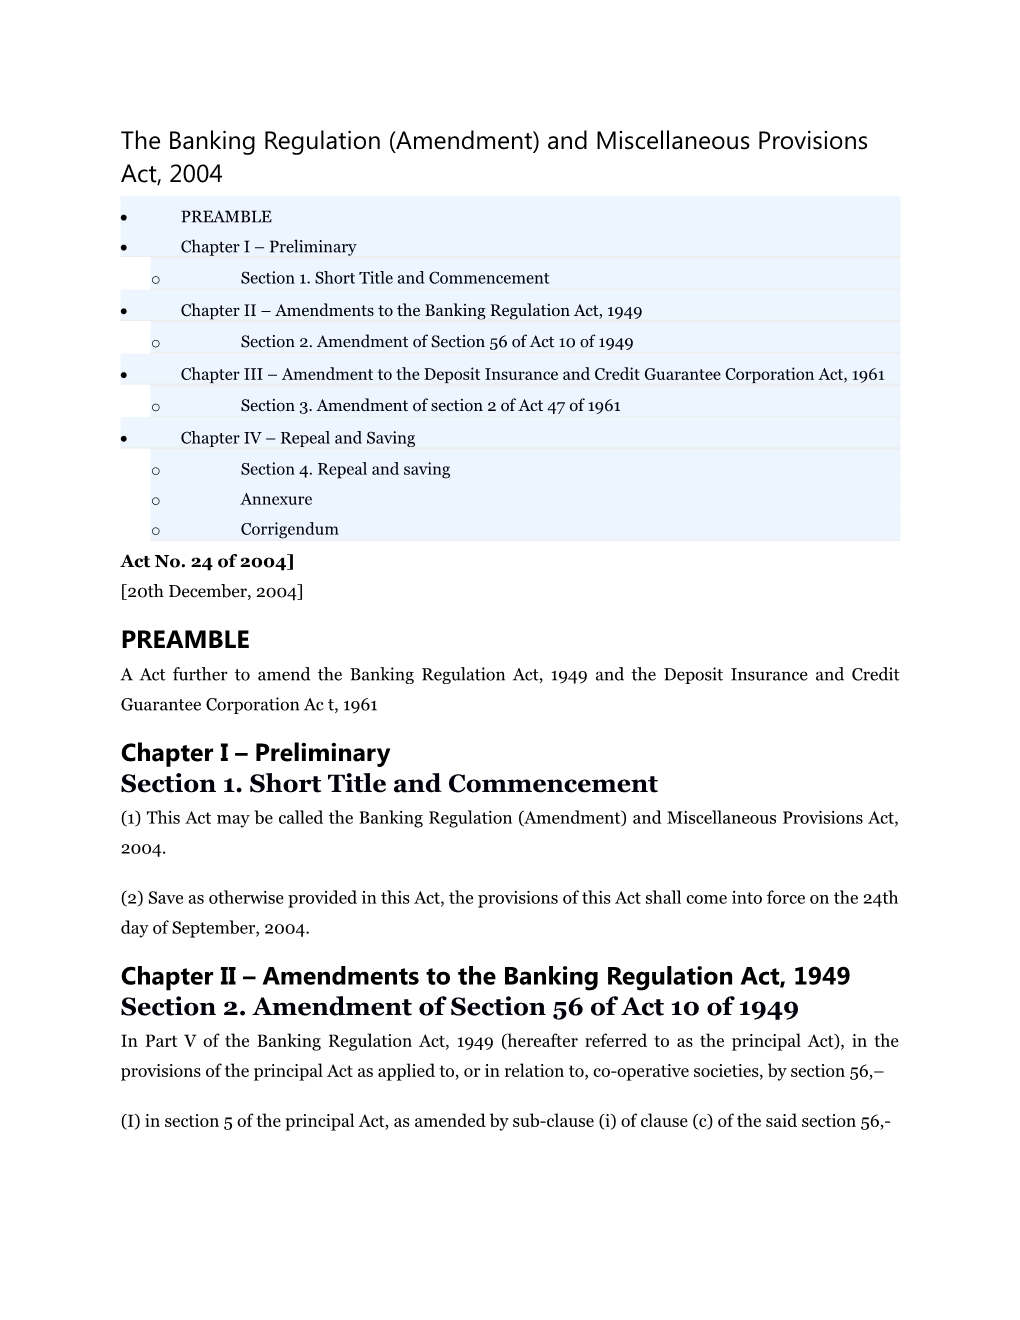 The Banking Regulation (Amendment) and Miscellaneous Provisions Act, 2004